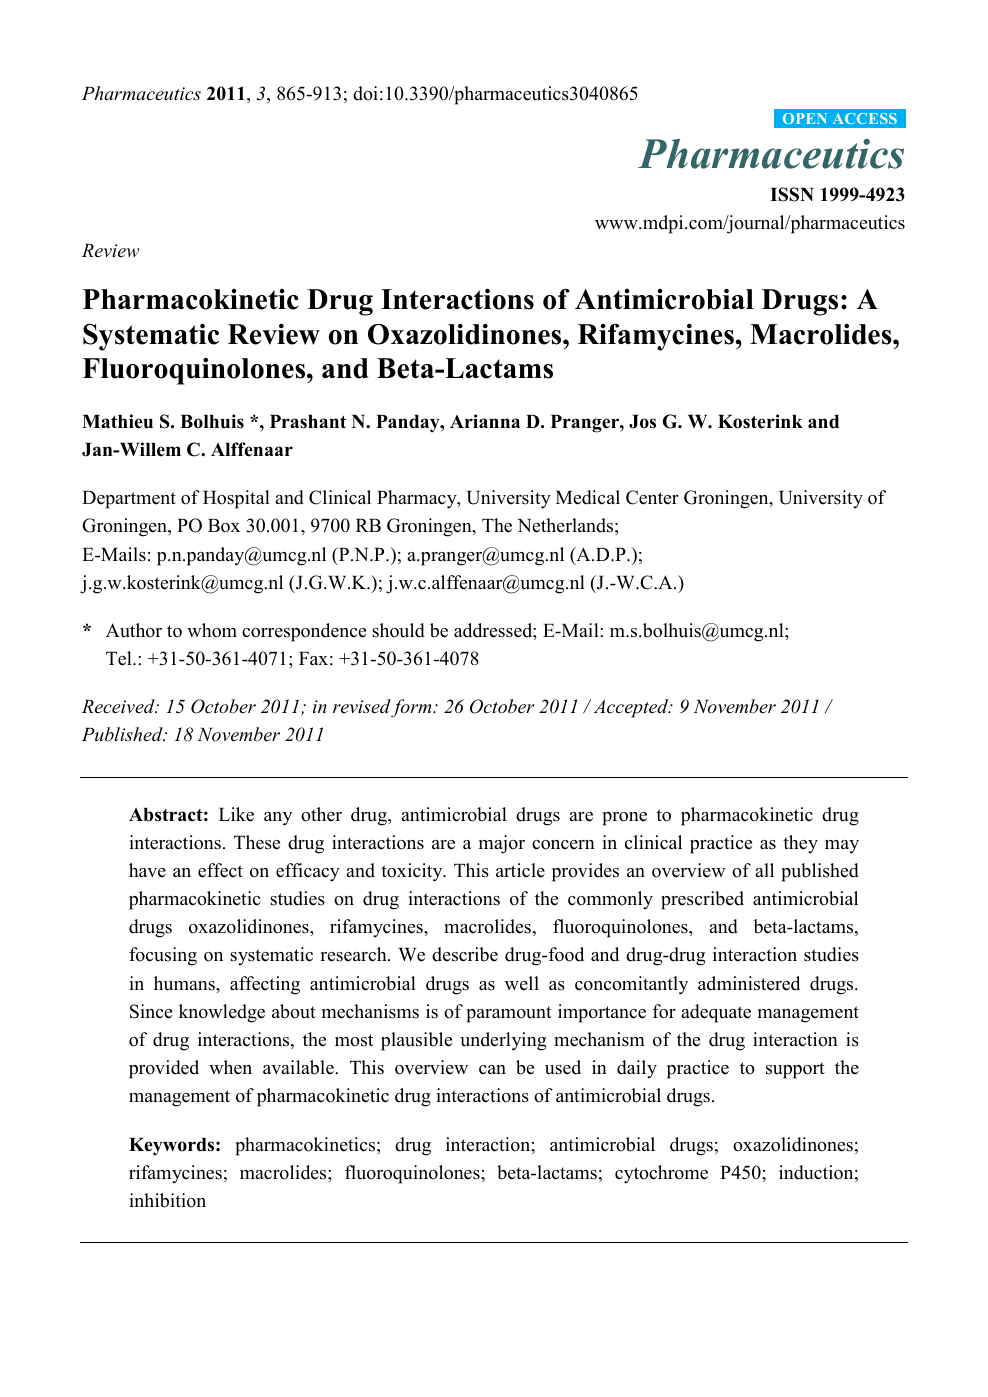 Pharmacokinetic Drug Interactions Of Antimicrobial Drugs A Systematic Review On Oxazolidinones Rifamycines Macrolides Fluoroquinolones And Beta Lactams Topic Of Research Paper In Clinical Medicine Download Scholarly Article Pdf And Read For Free